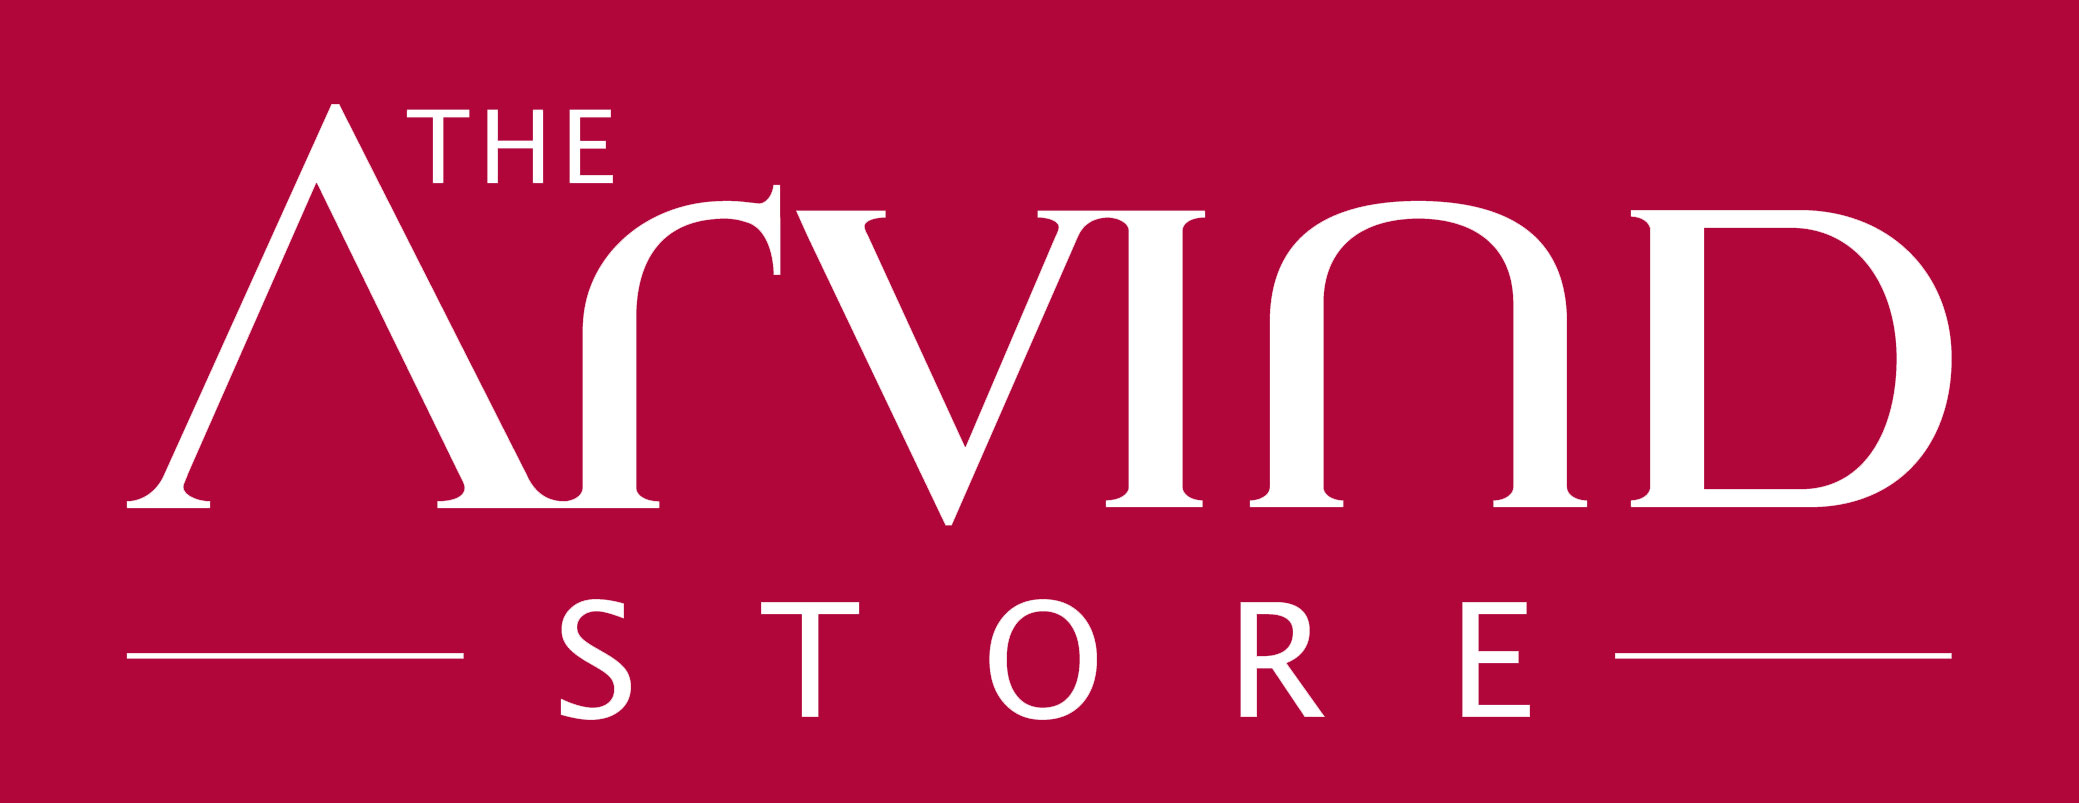 The Arvind Store | Men's Fashion Clothing | Ready To Wear Clothes